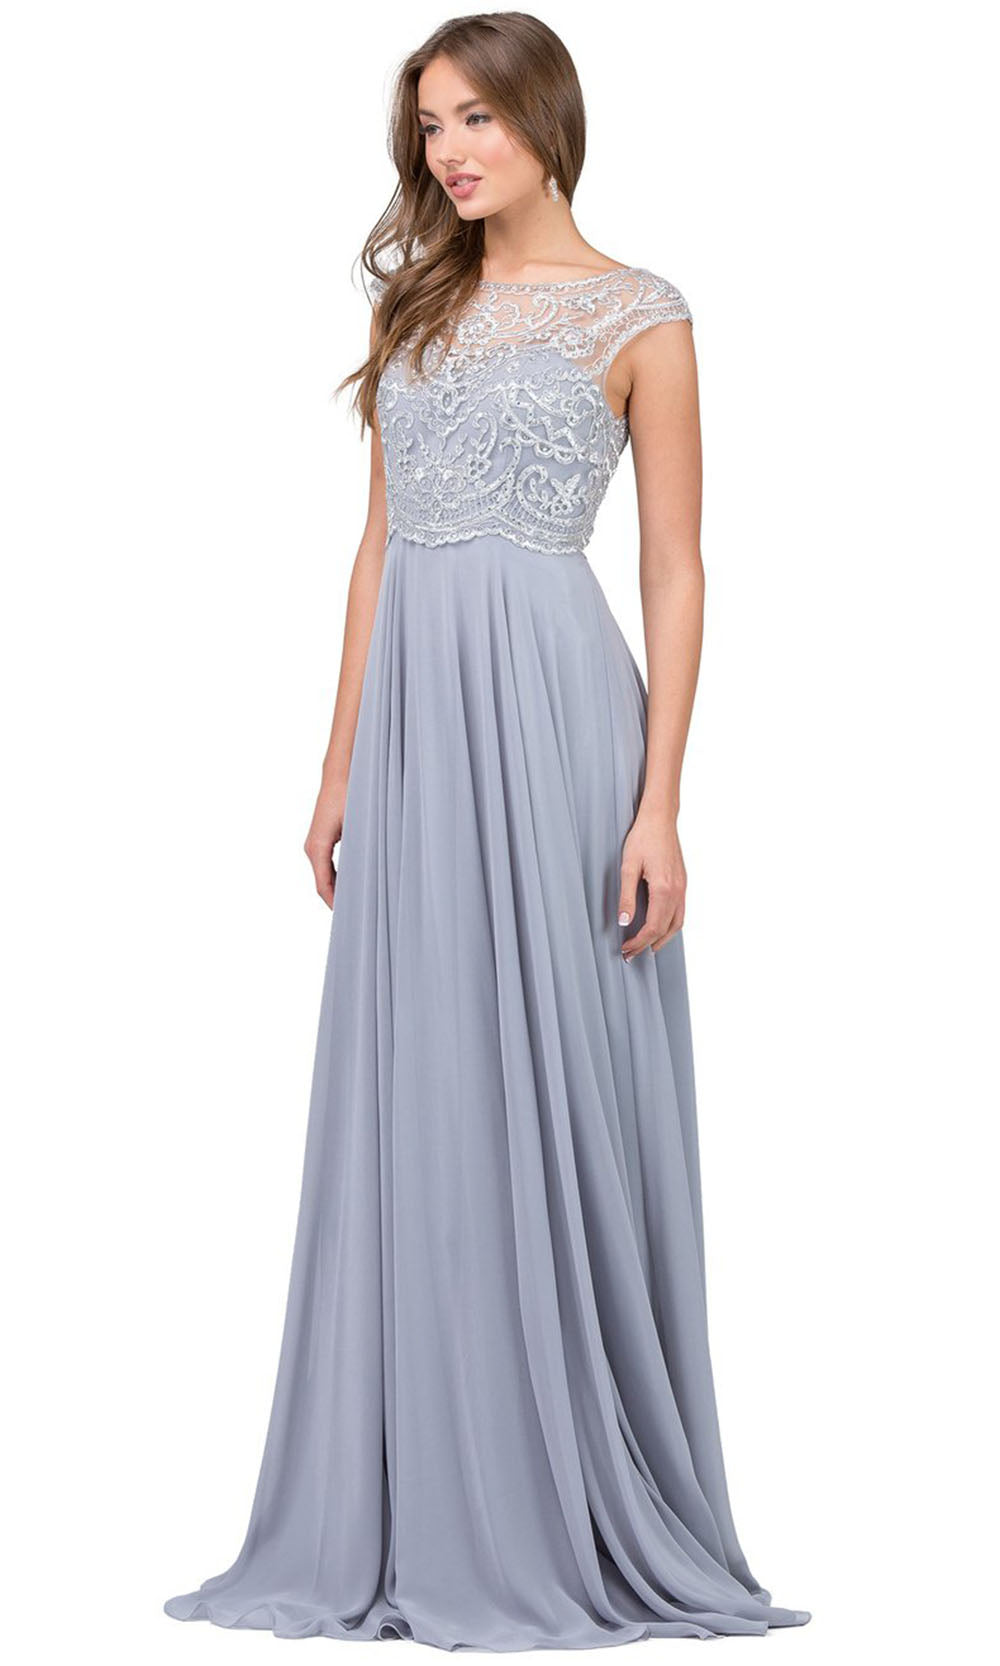 Dancing Queen - 2241 Embroidered Bateau Neck A-Line Dress In Silver